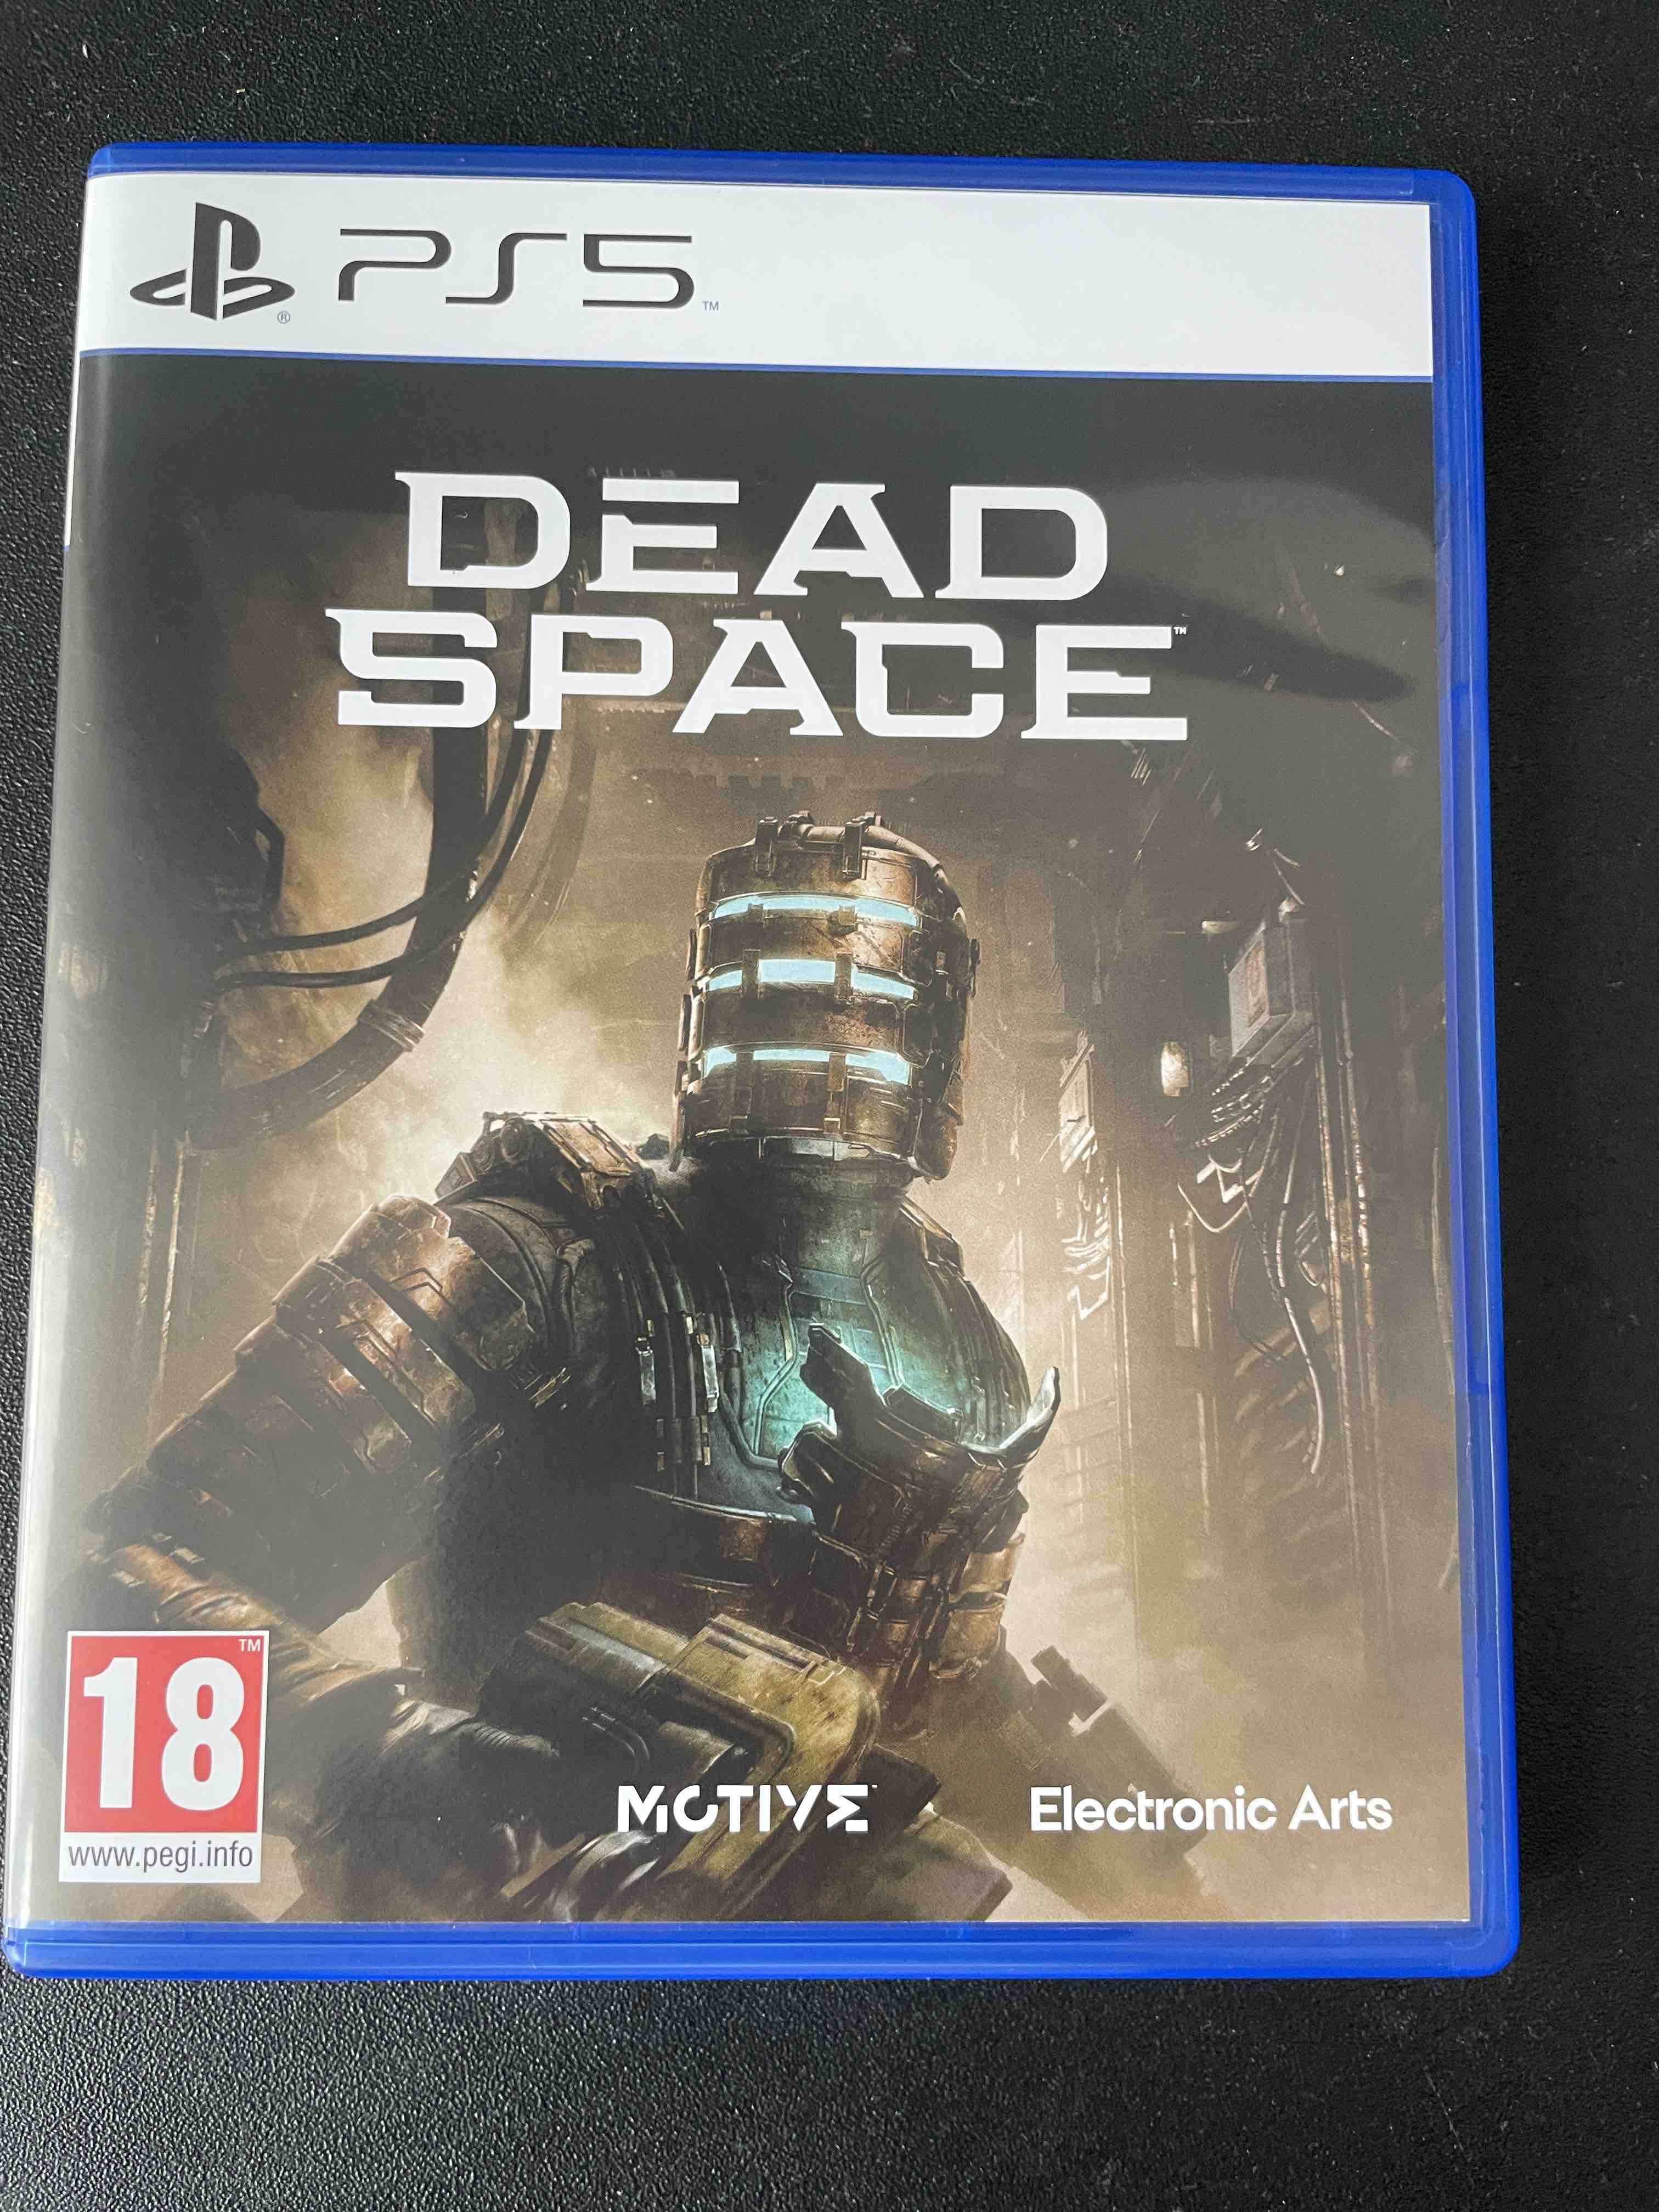 Dead Space Remake. Dead space remake ps5